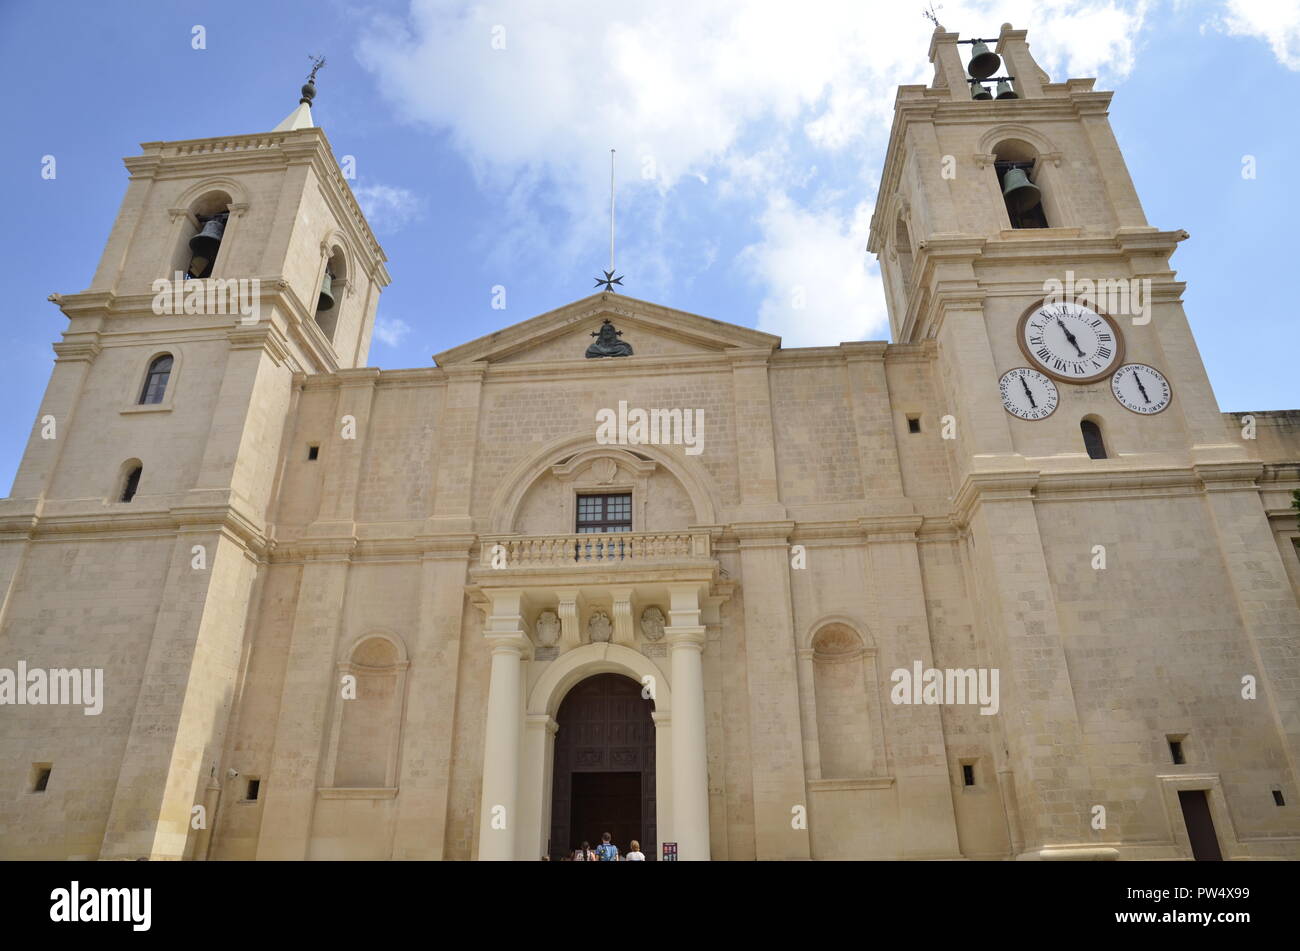 St. John's Co-Cathedral in the Maltese capital of Valletta. Stock Photo